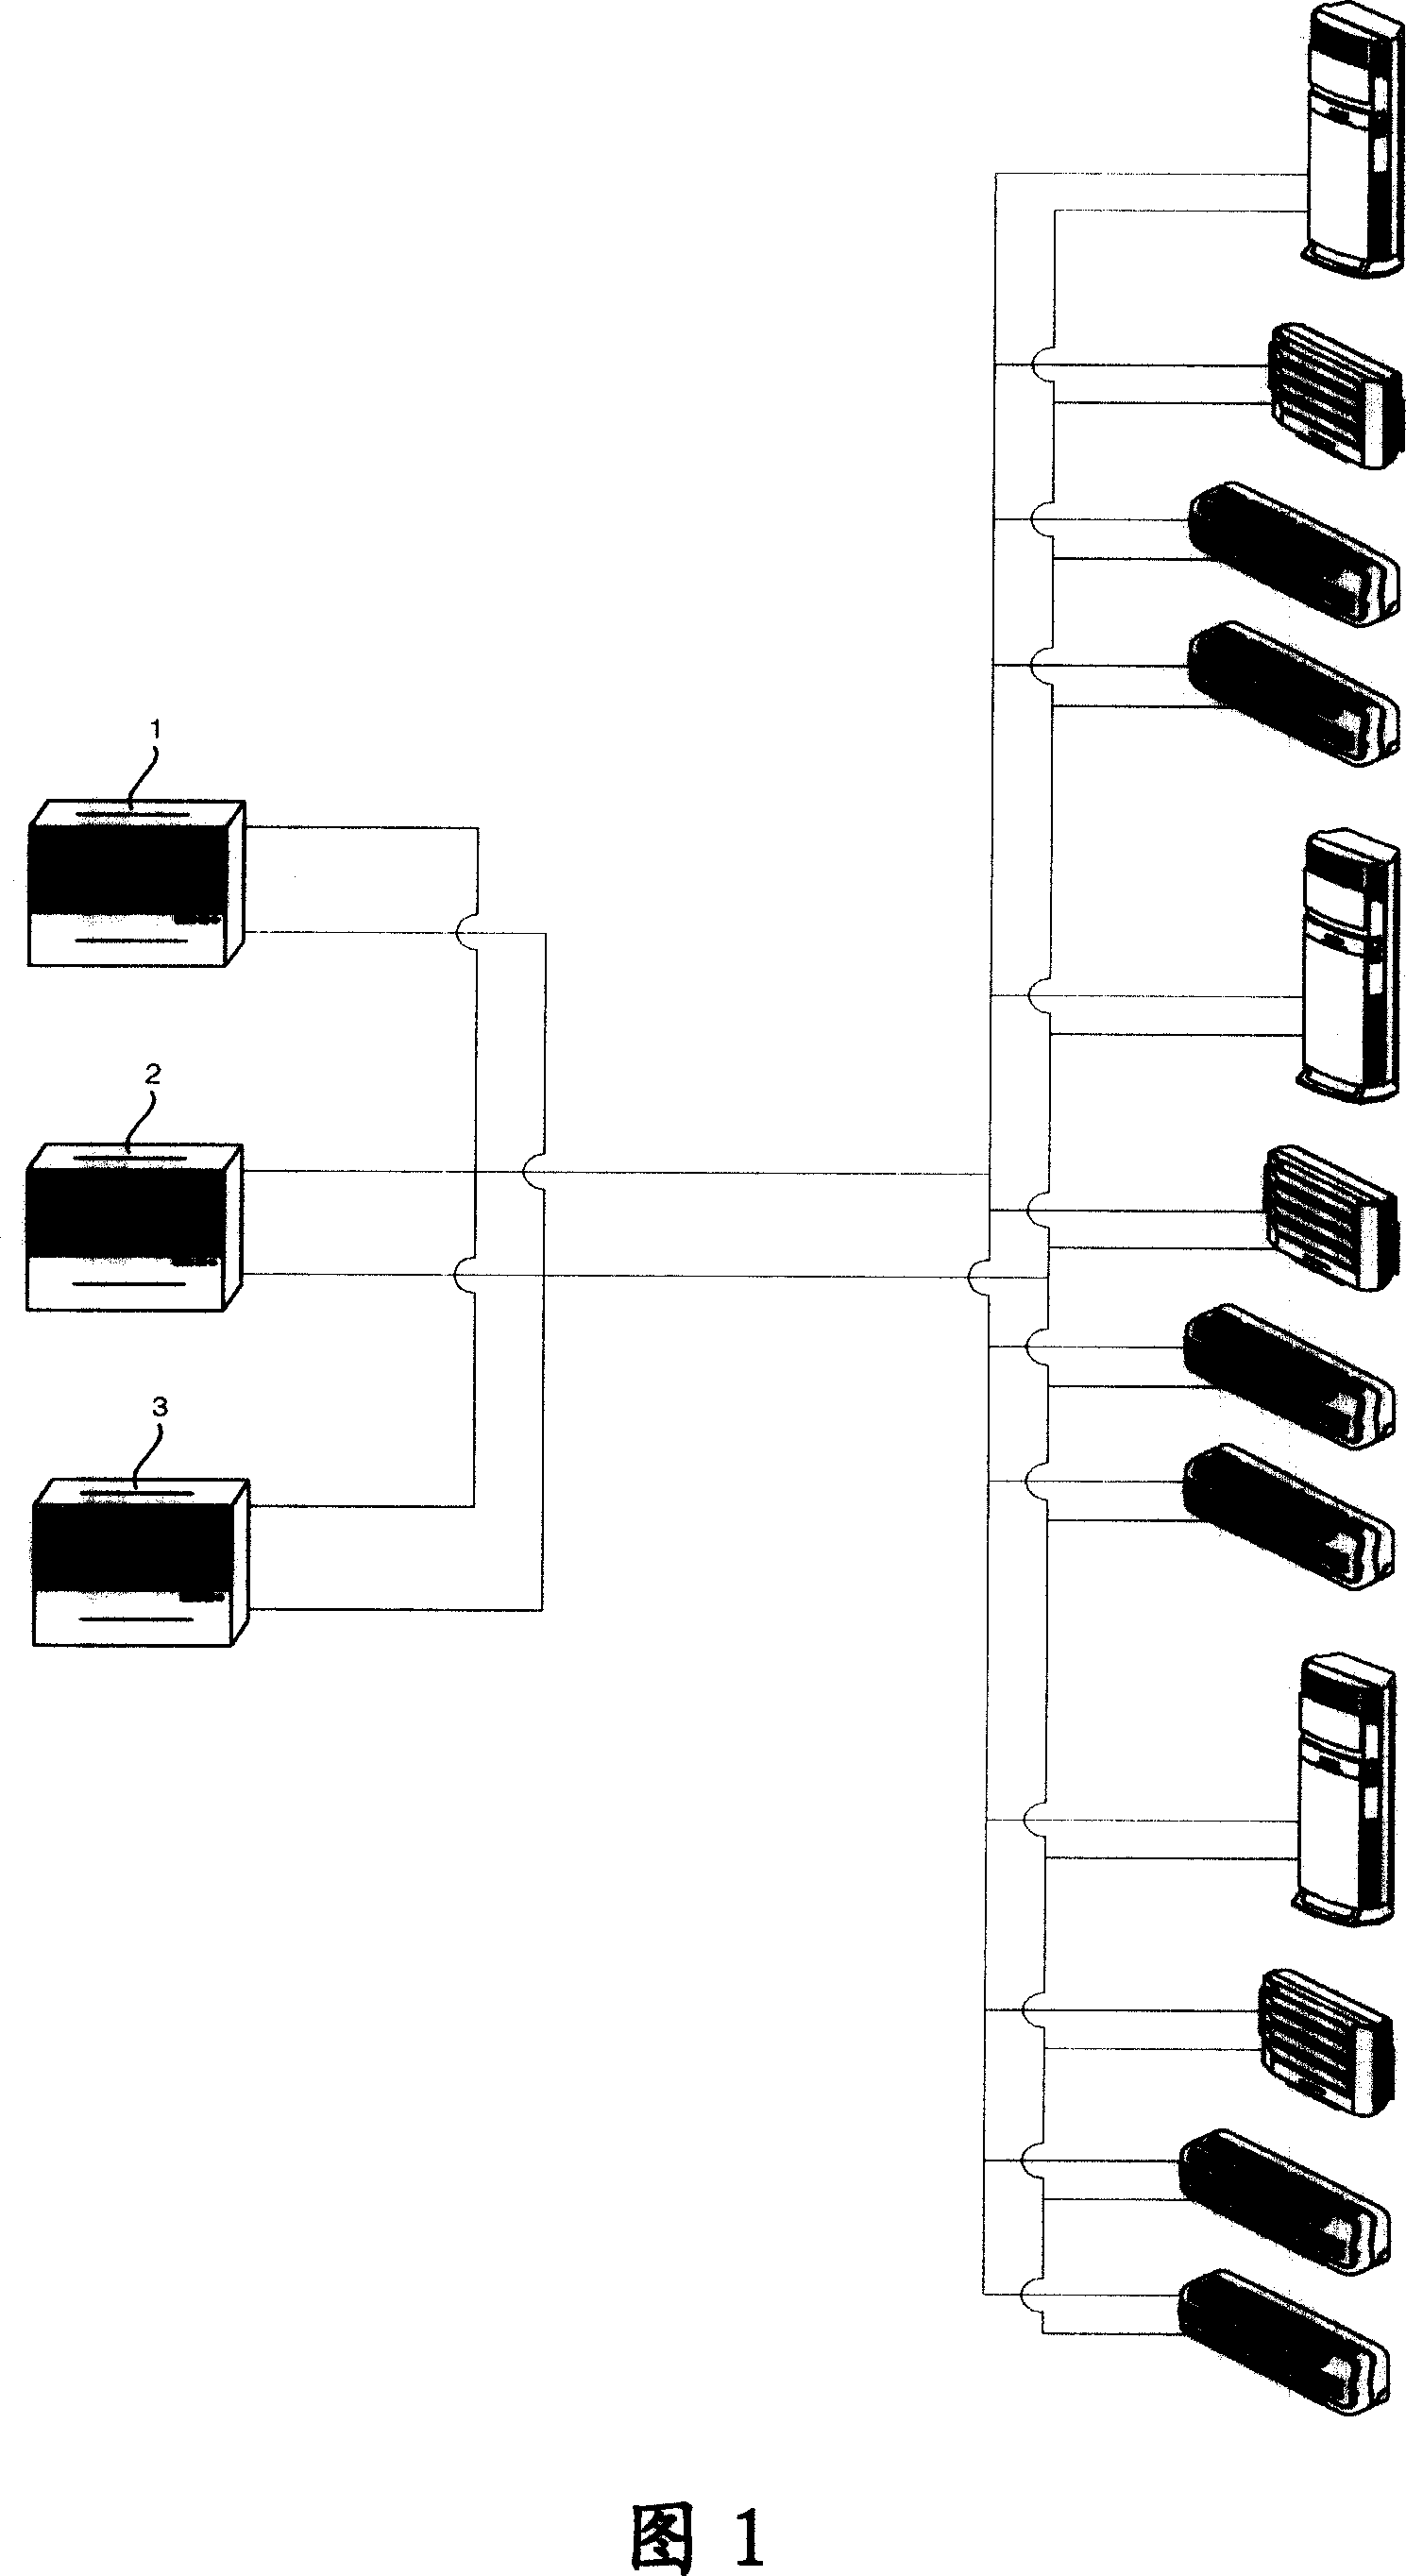 Duplex air governor and its control method